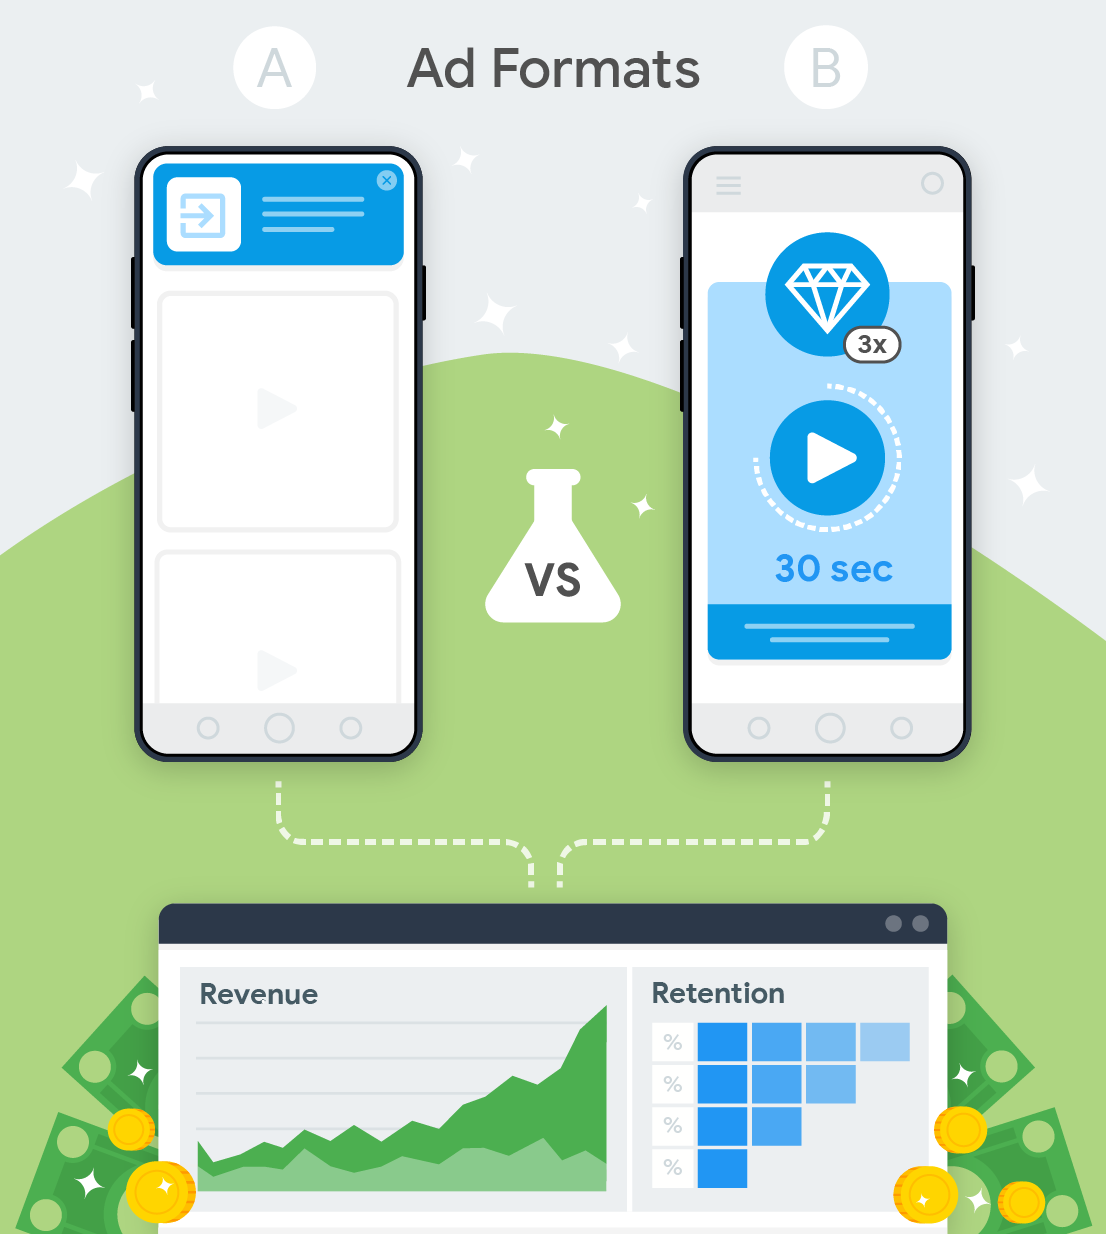 testing two ad formats and their impact on revenue and retention